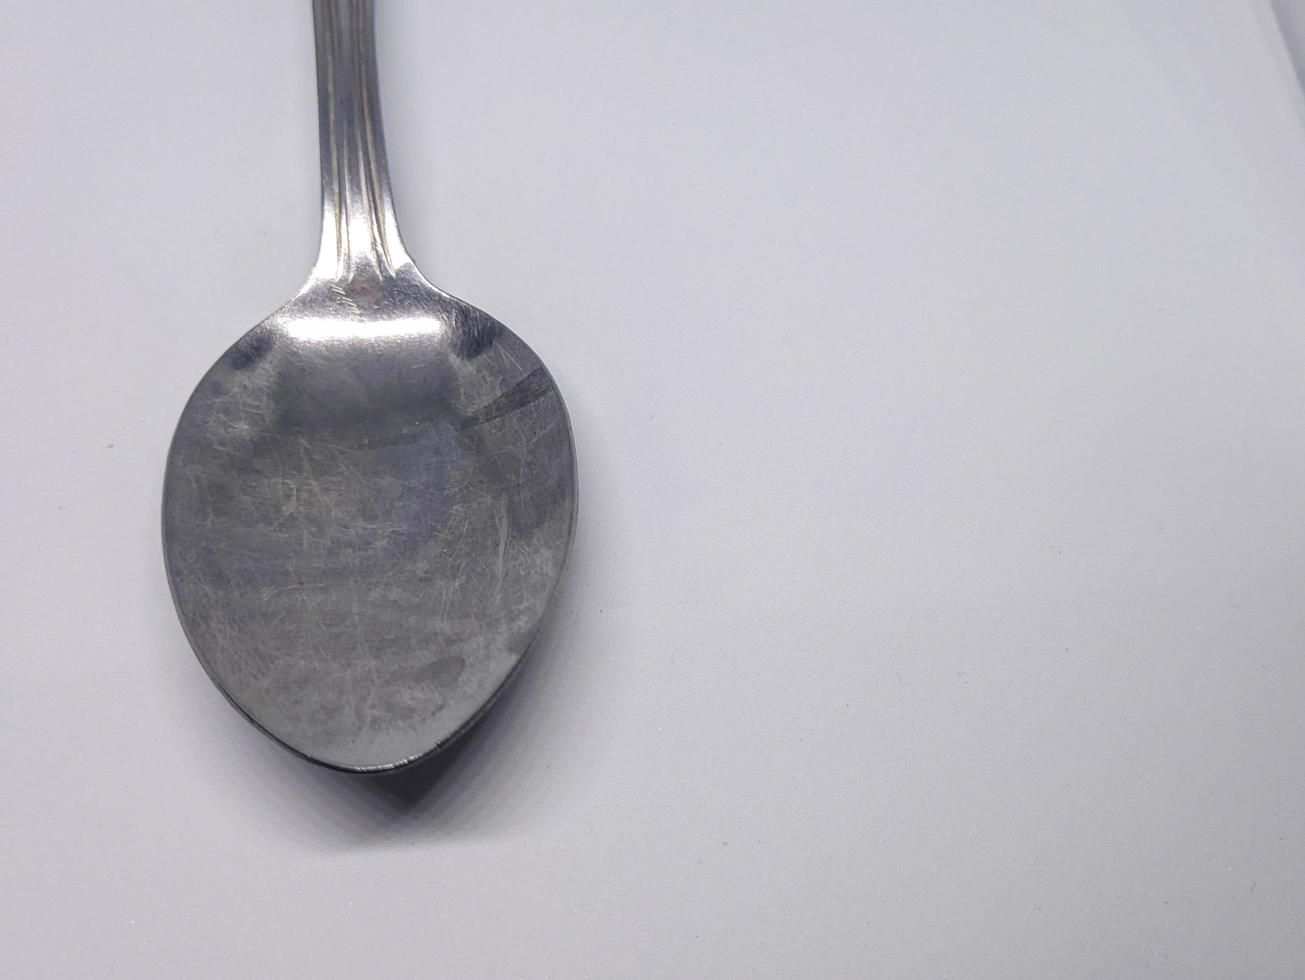 A close up of spoon with white background photo